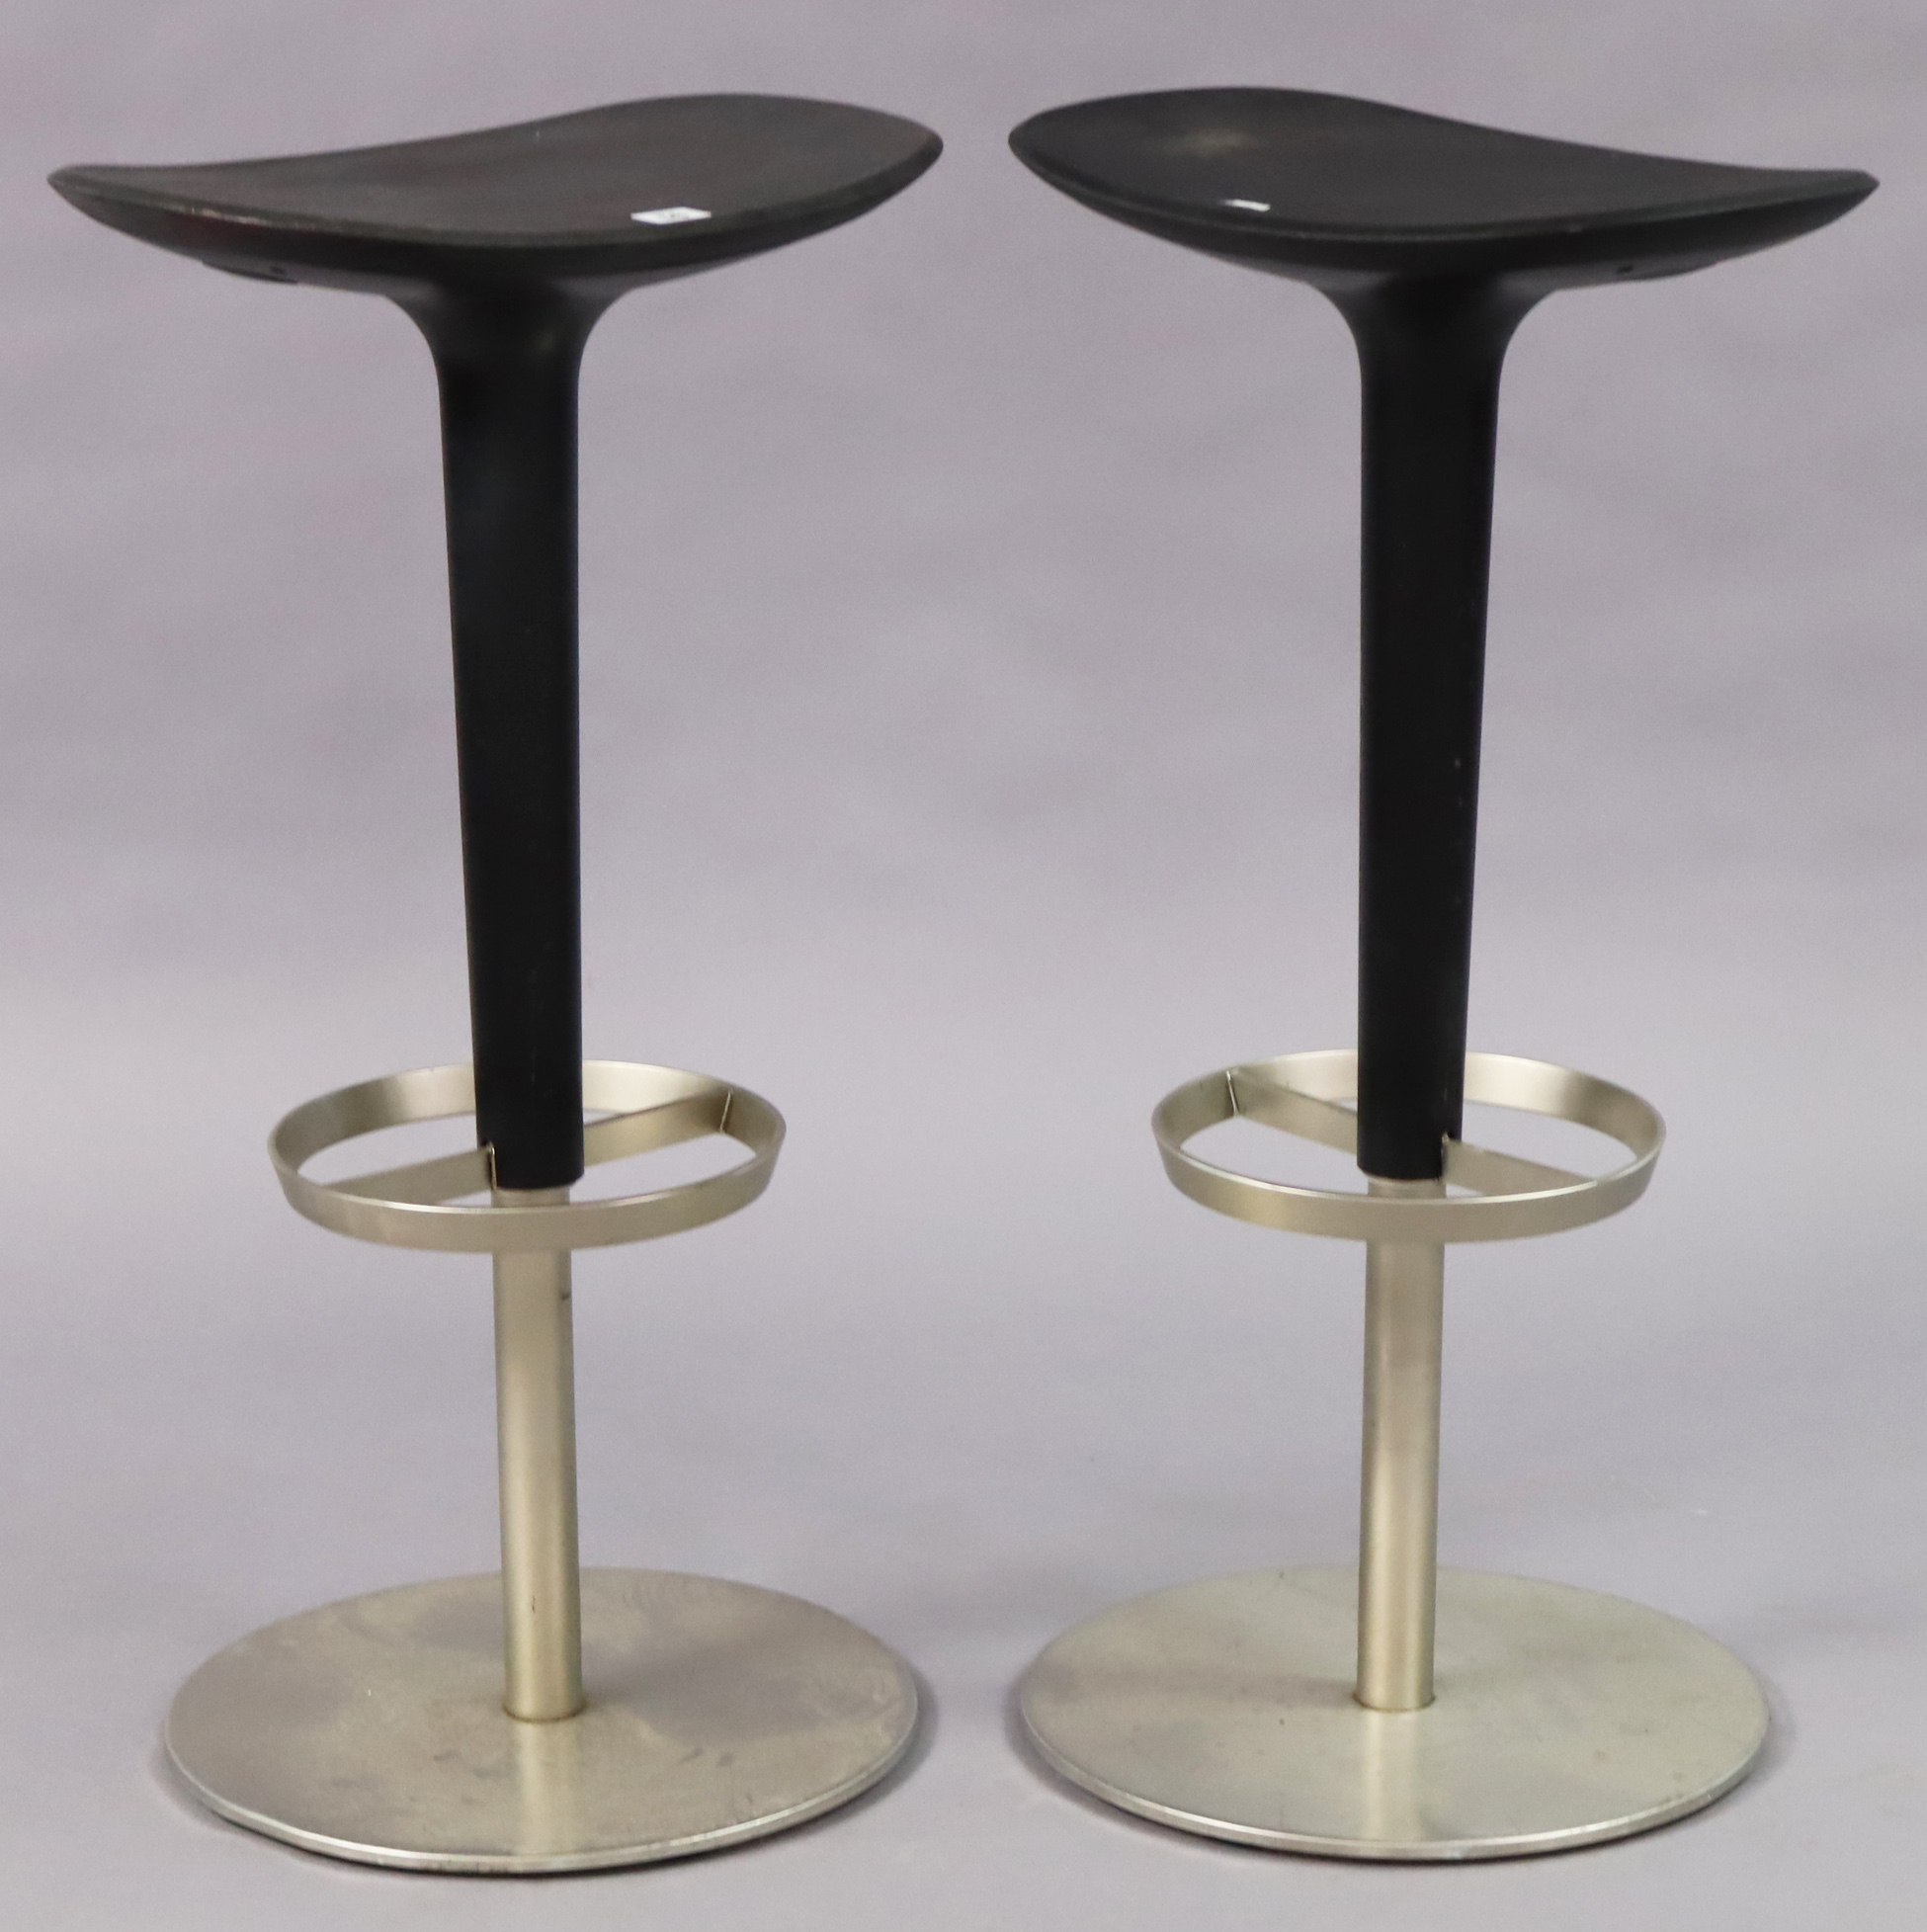 A pair of Arper (Italian) “Baber” free-standing bar stools designed by Simon Pengelly (#1751).